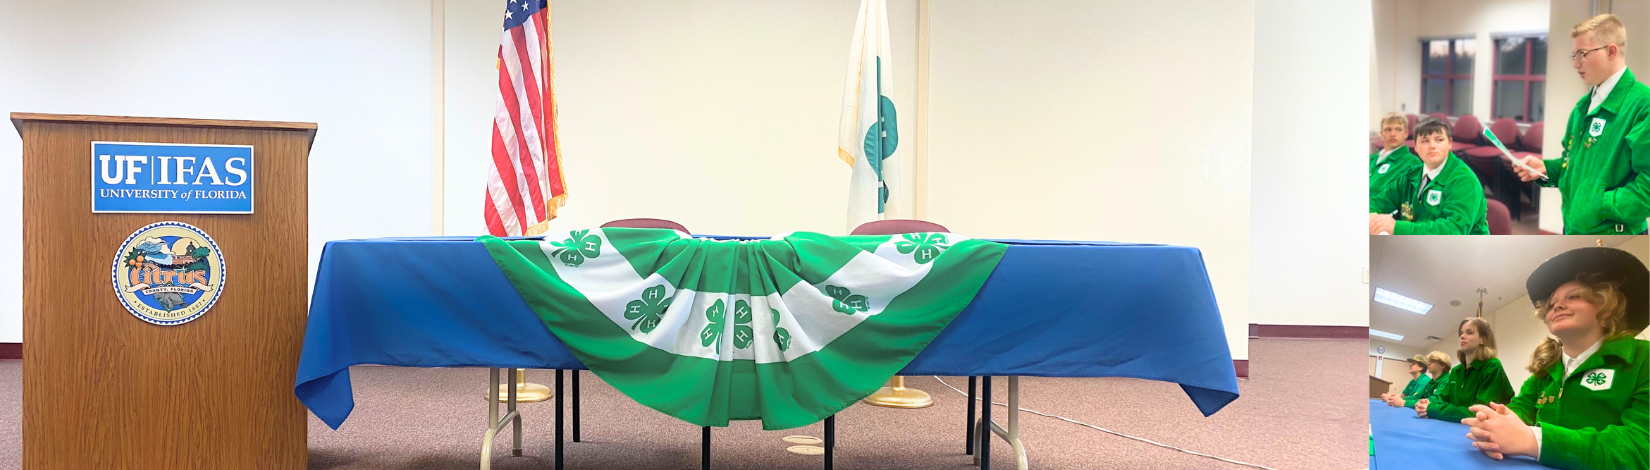 County Council 4-H meeting room with youth speaking